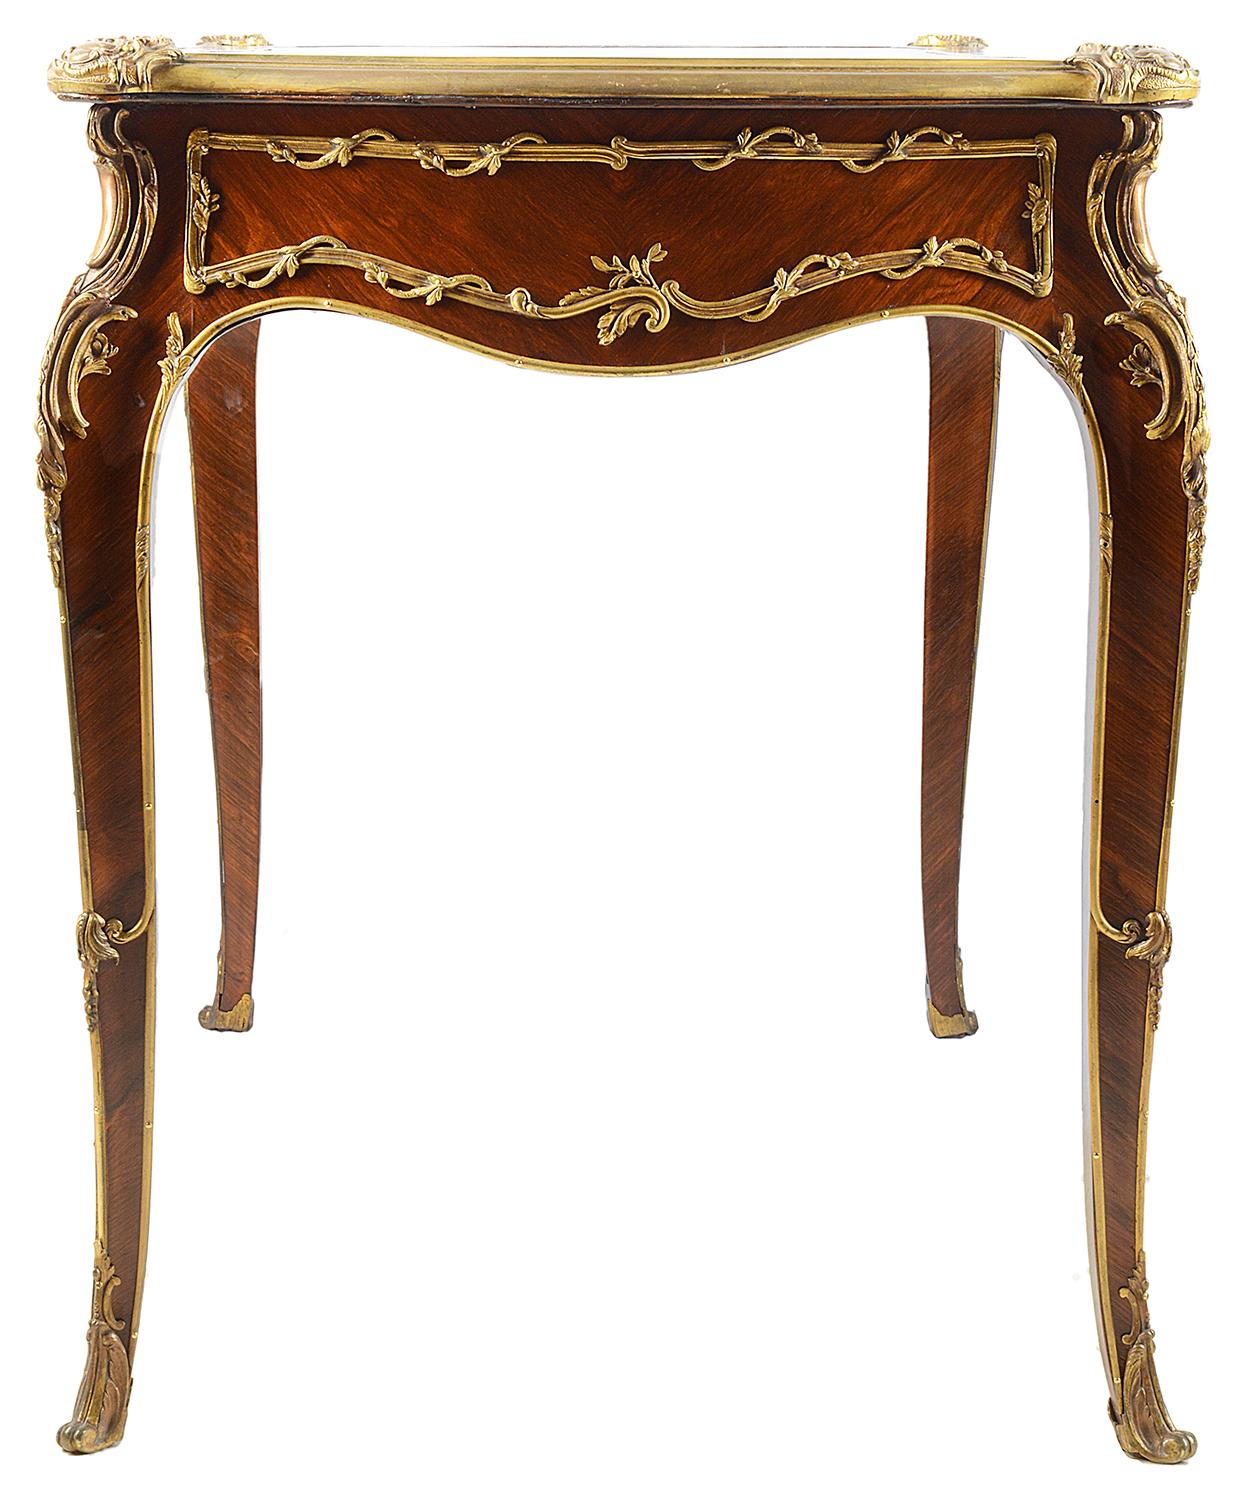 Louis XVI 19th Century French Writing Table For Sale